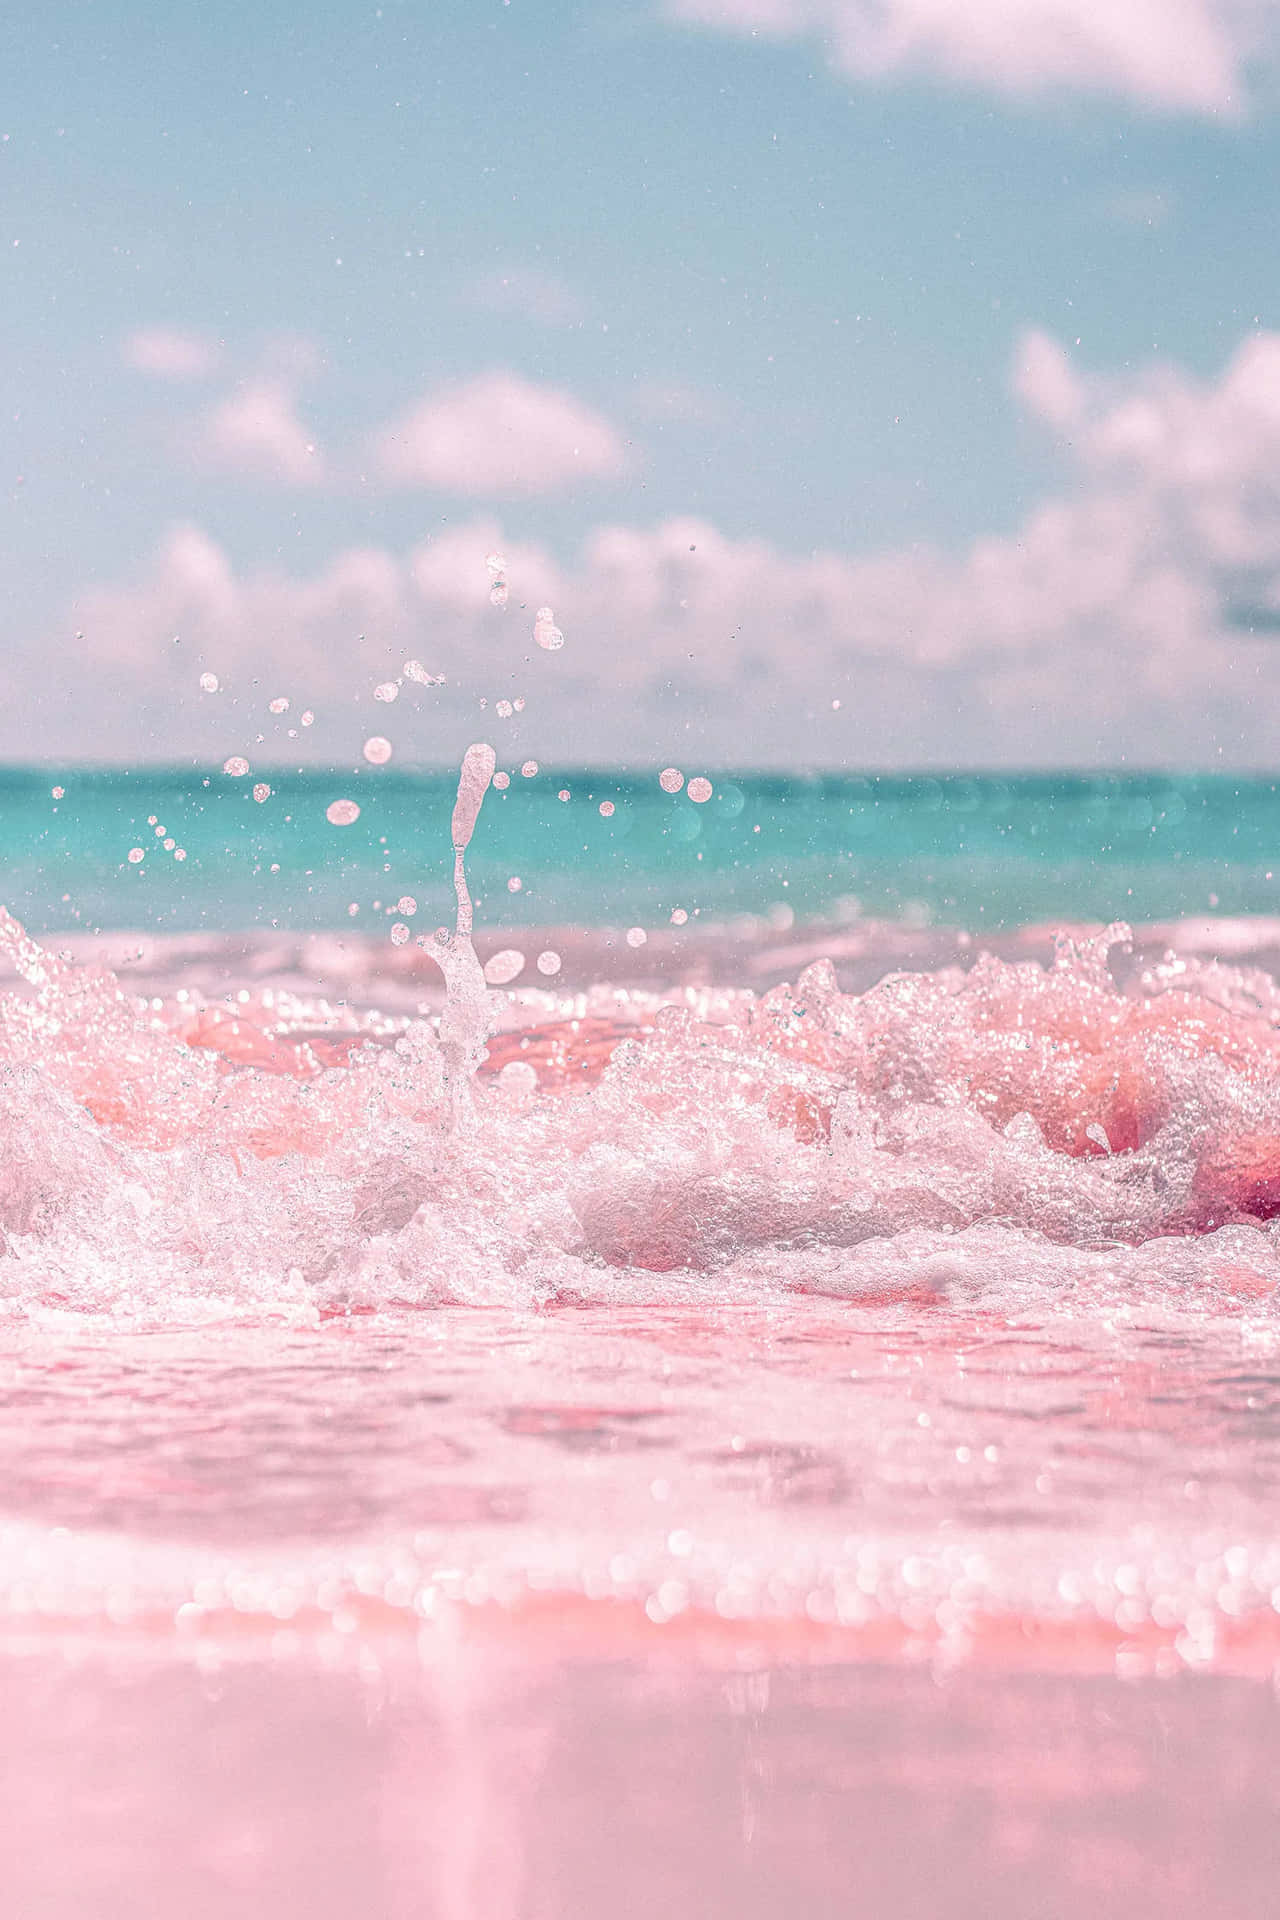 100+] Pink Beach Aesthetic Wallpapers | Wallpapers.com